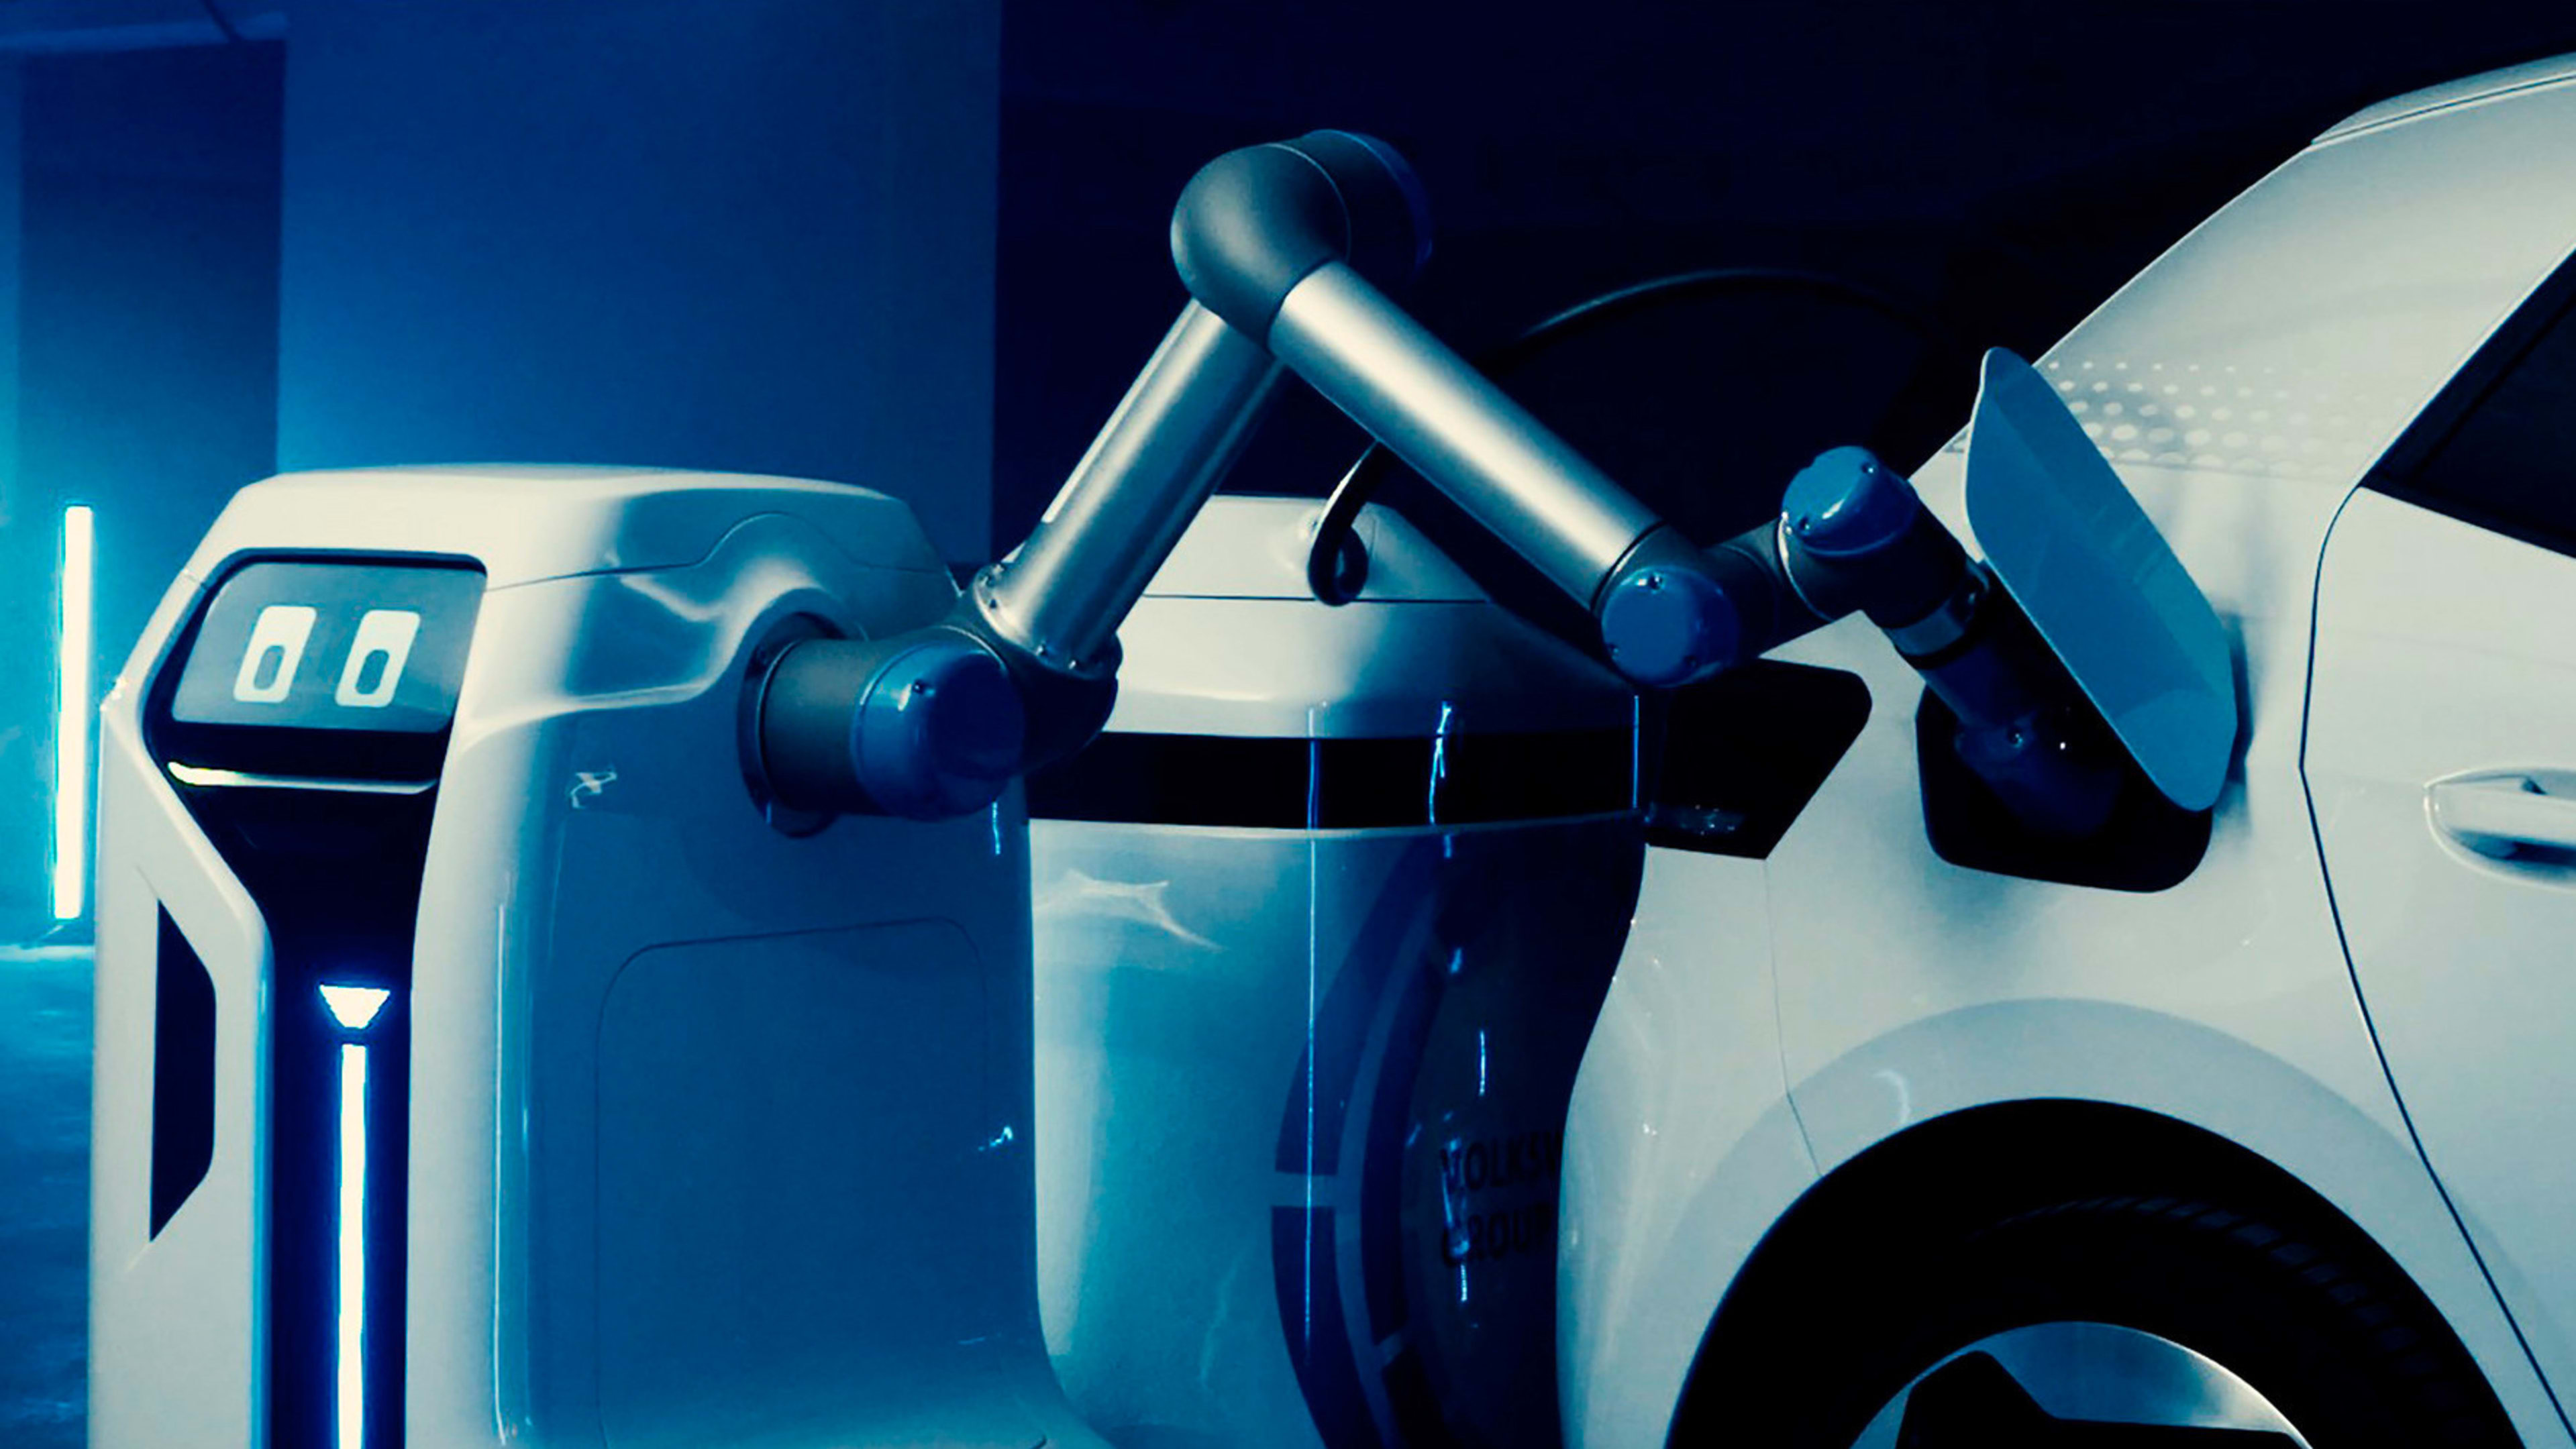 This helpful little Volkswagen robot will roll up and charge your electric car